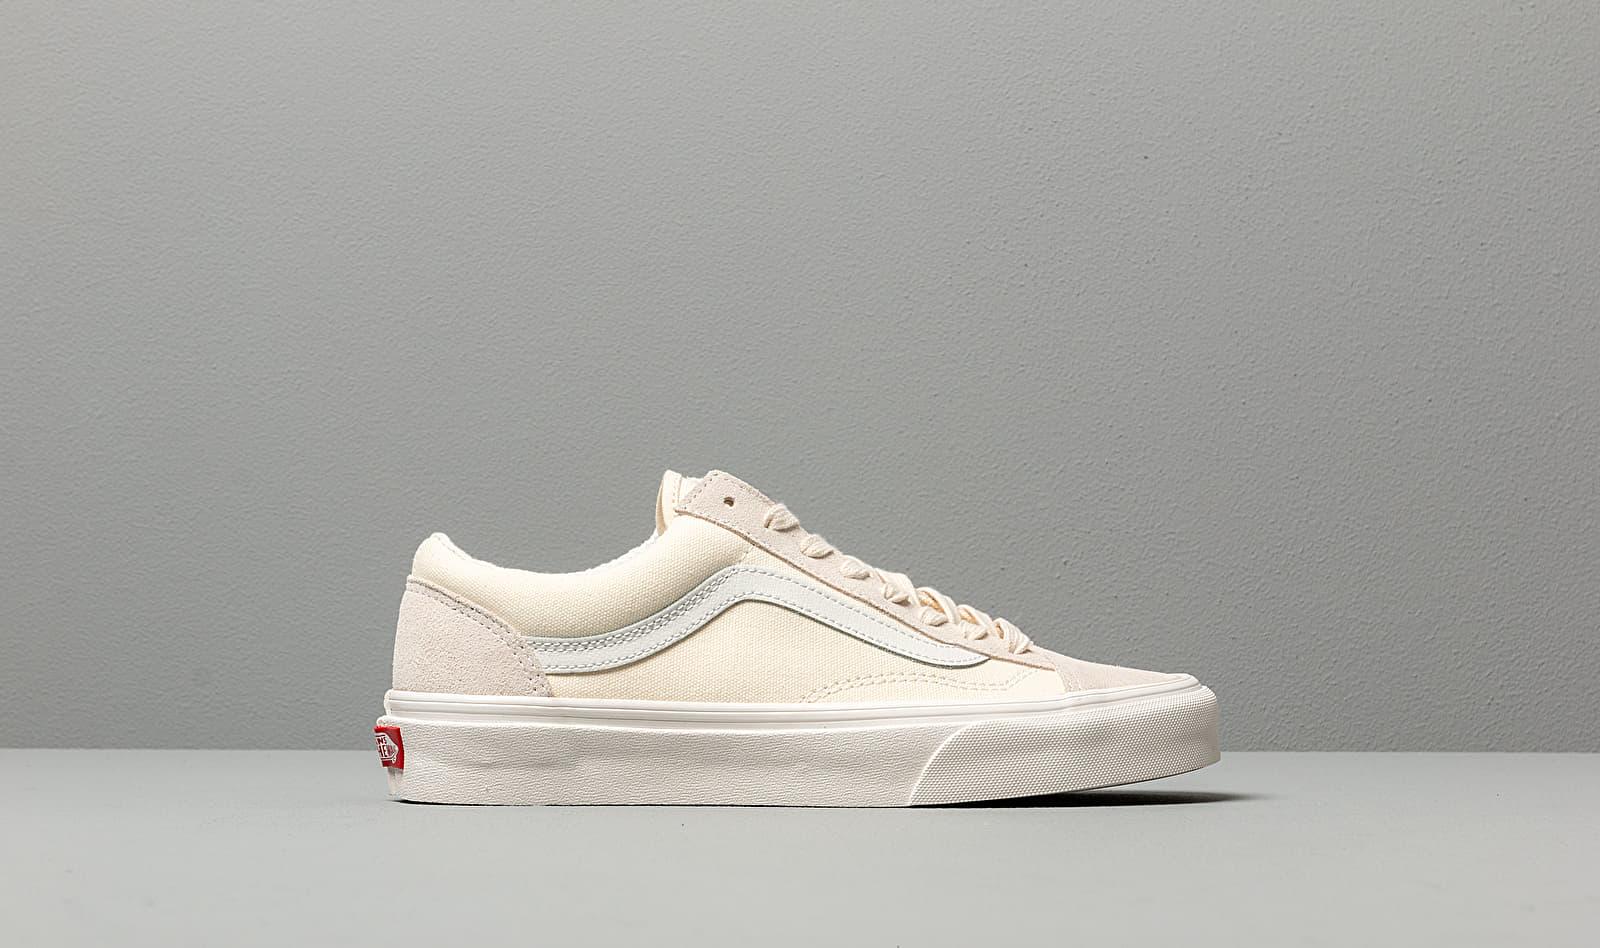 Vans Style 36 (vintage Sport) Classic White Blanc De Blanc in Red 